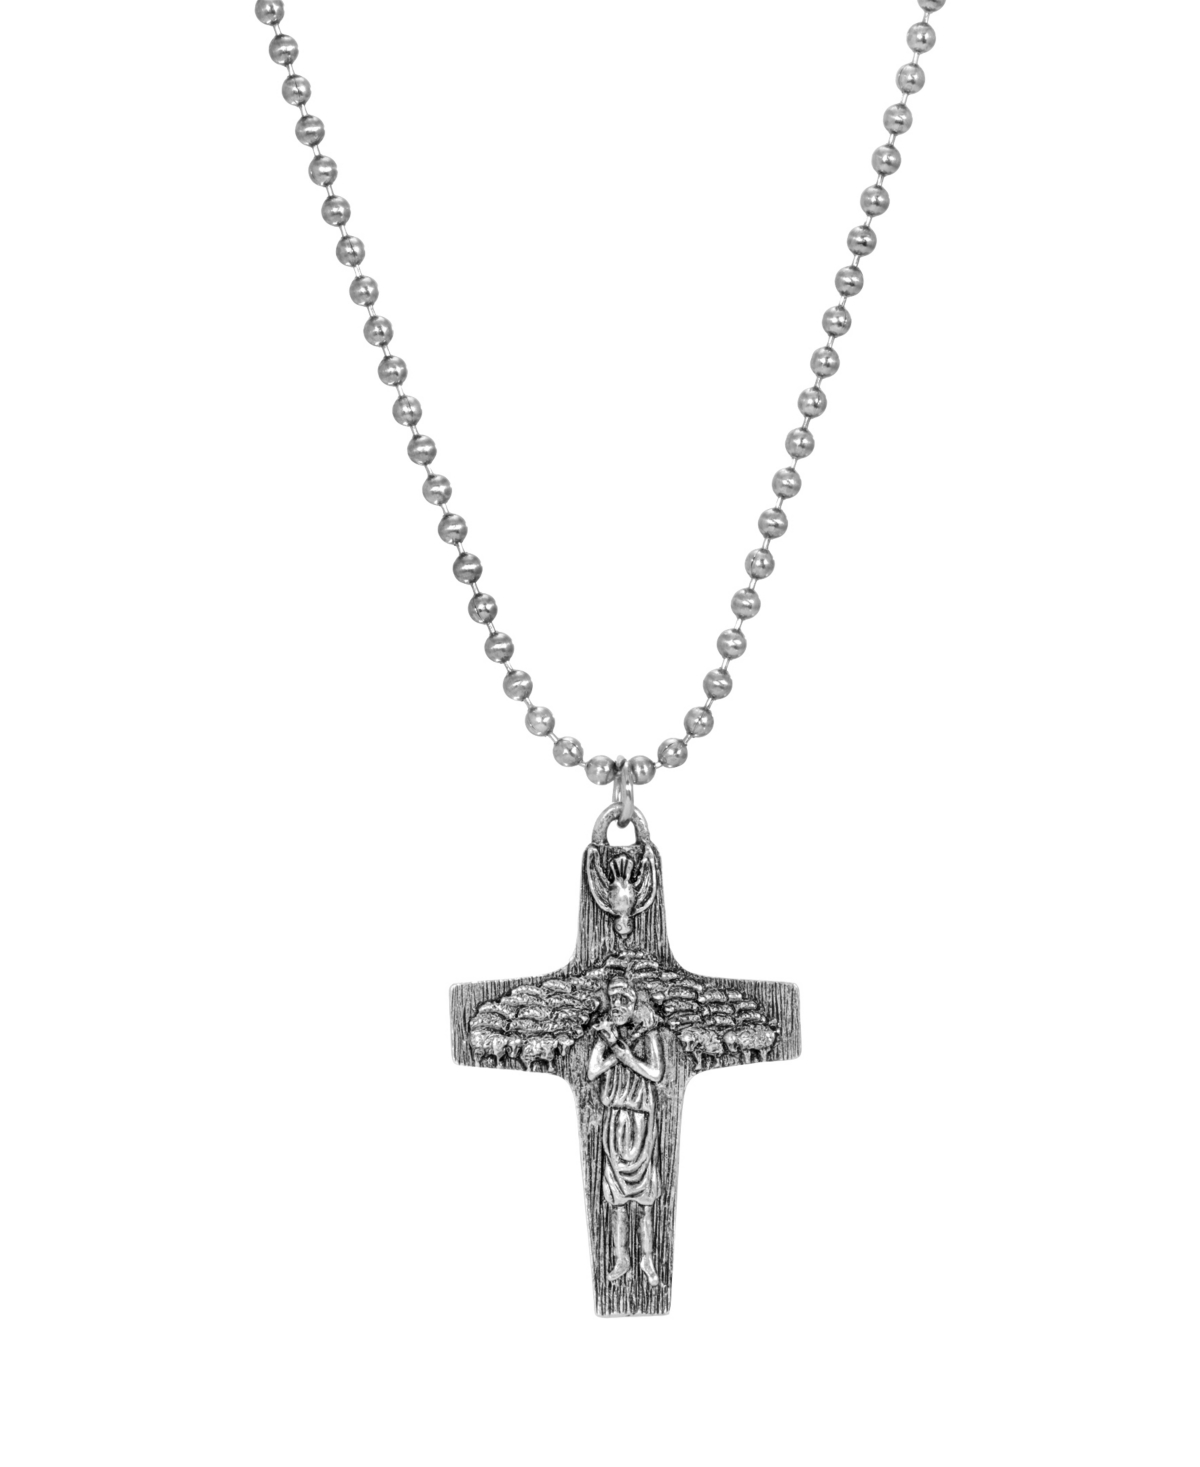 Men's Pewter Shepard and Sheep Cross Necklace - Silver-Tone